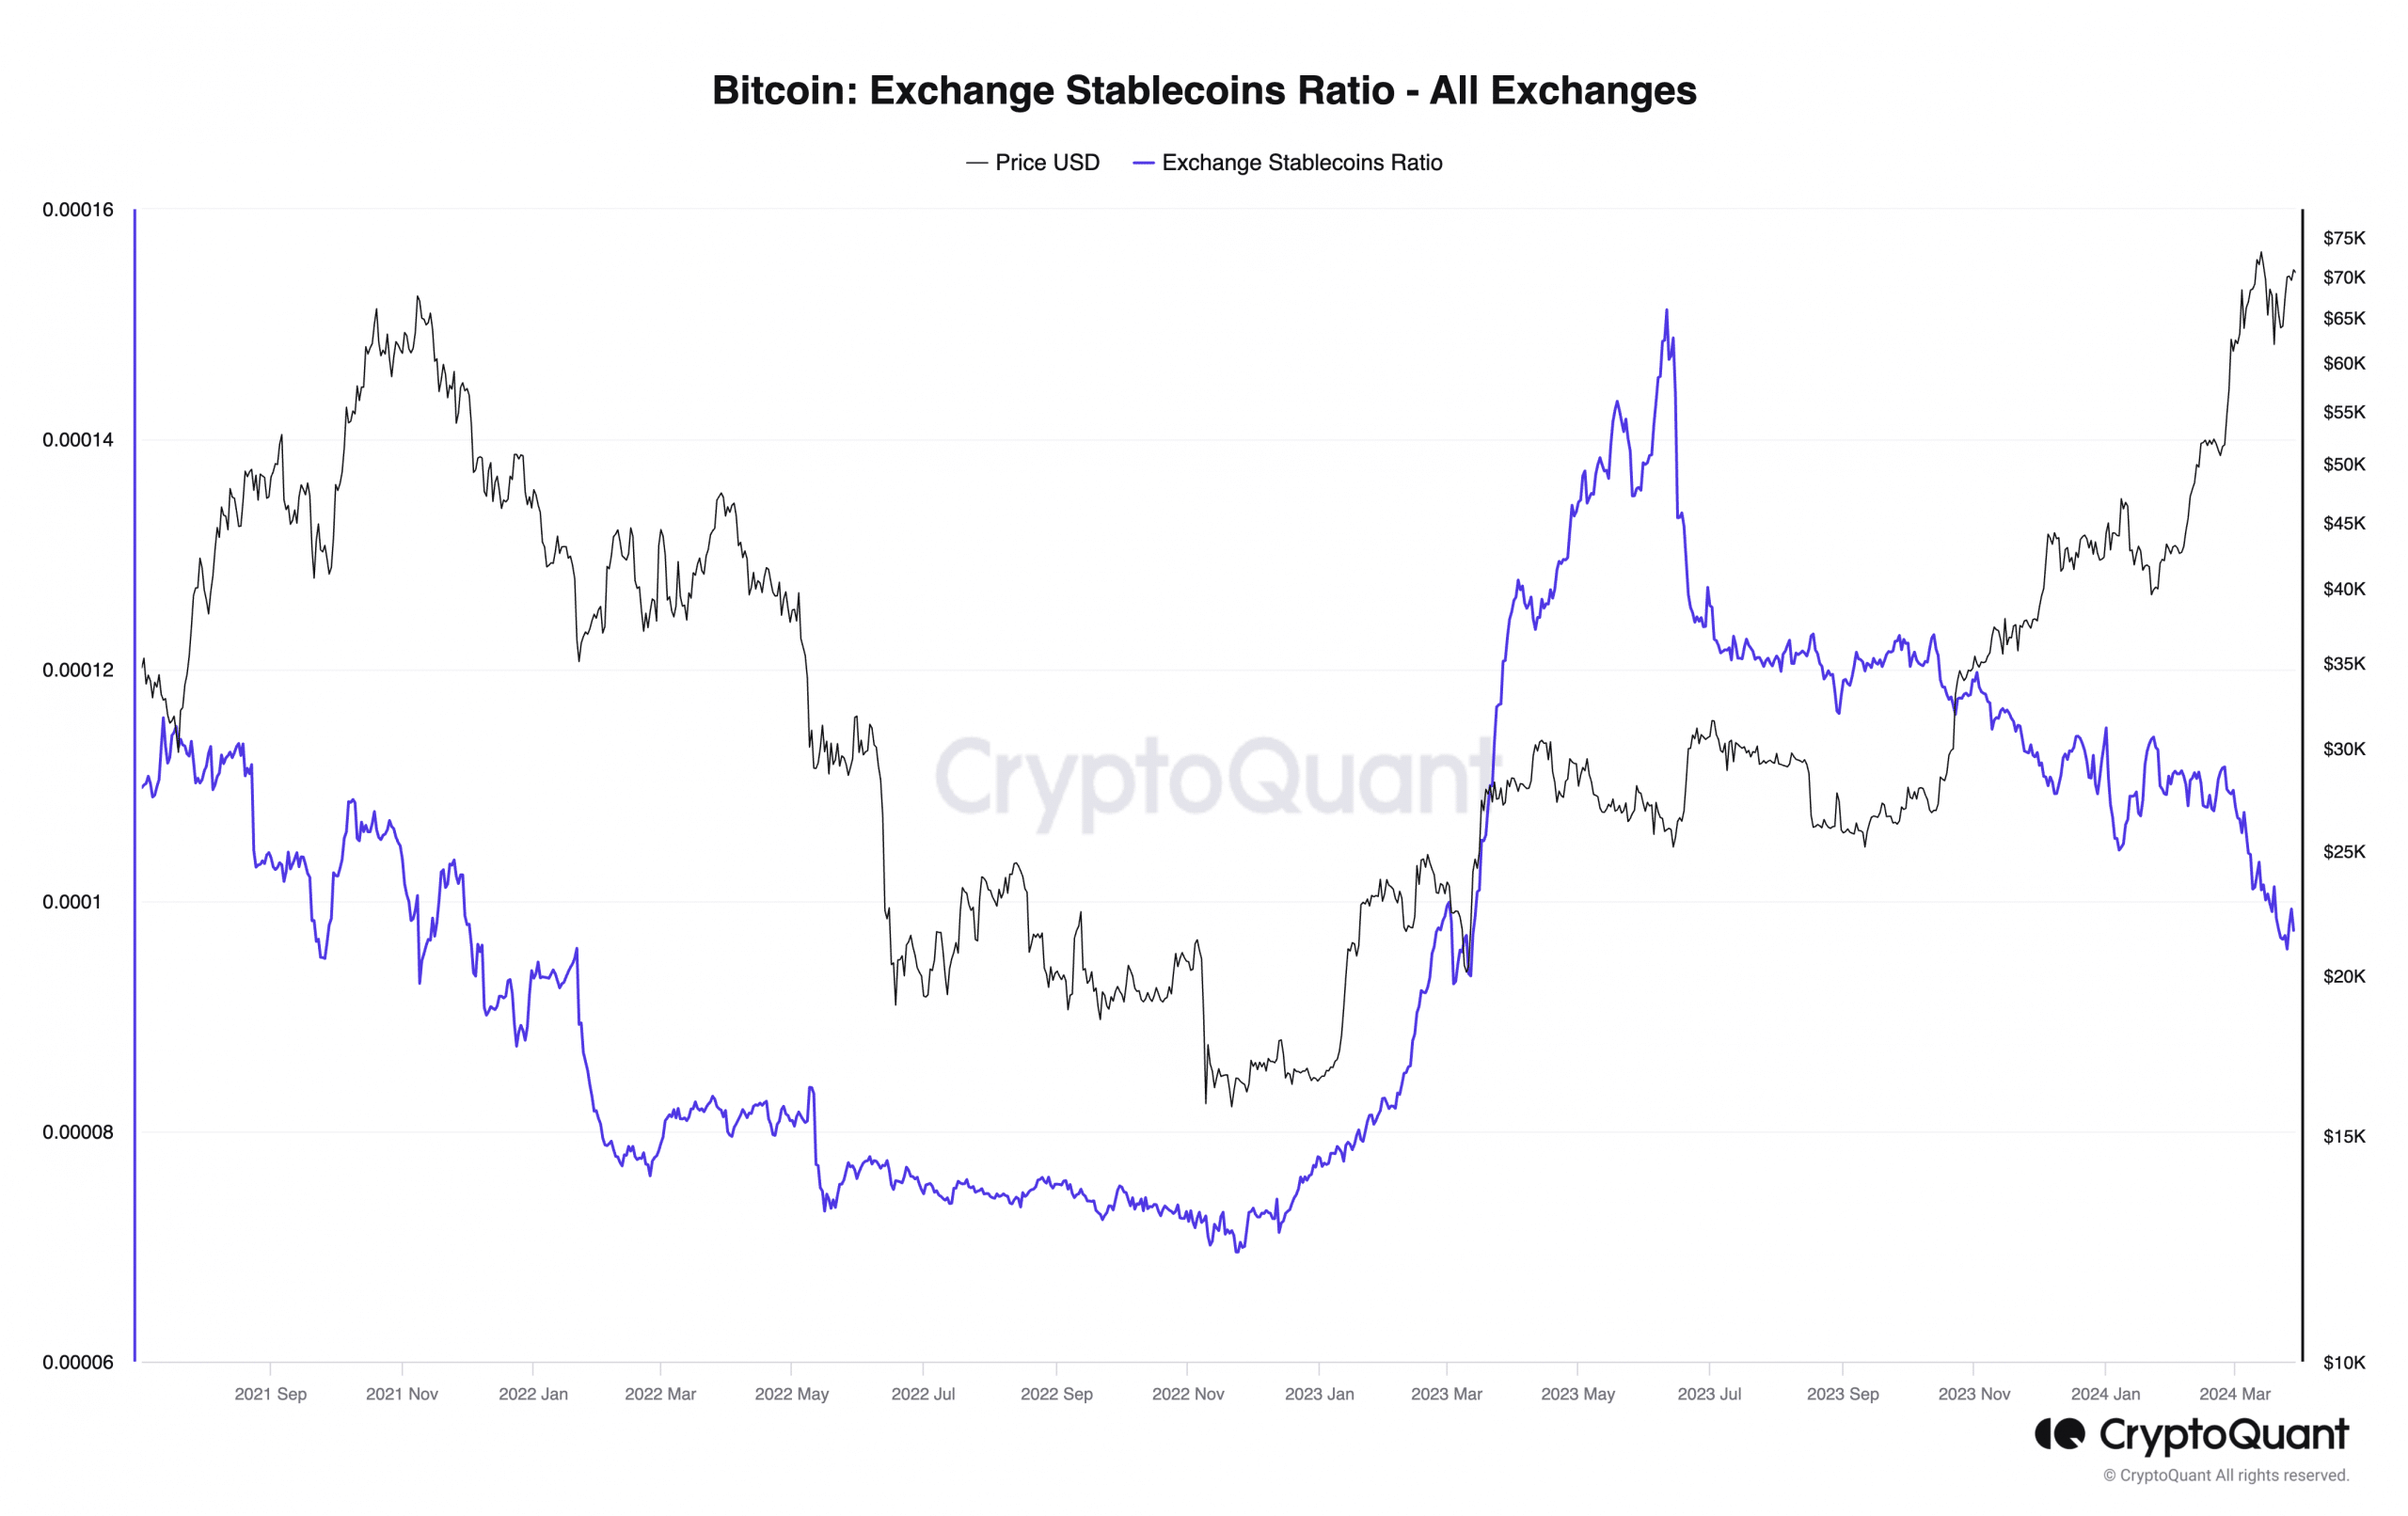 Stablecoin ratio of Bitcoin exchanges - All exchanges